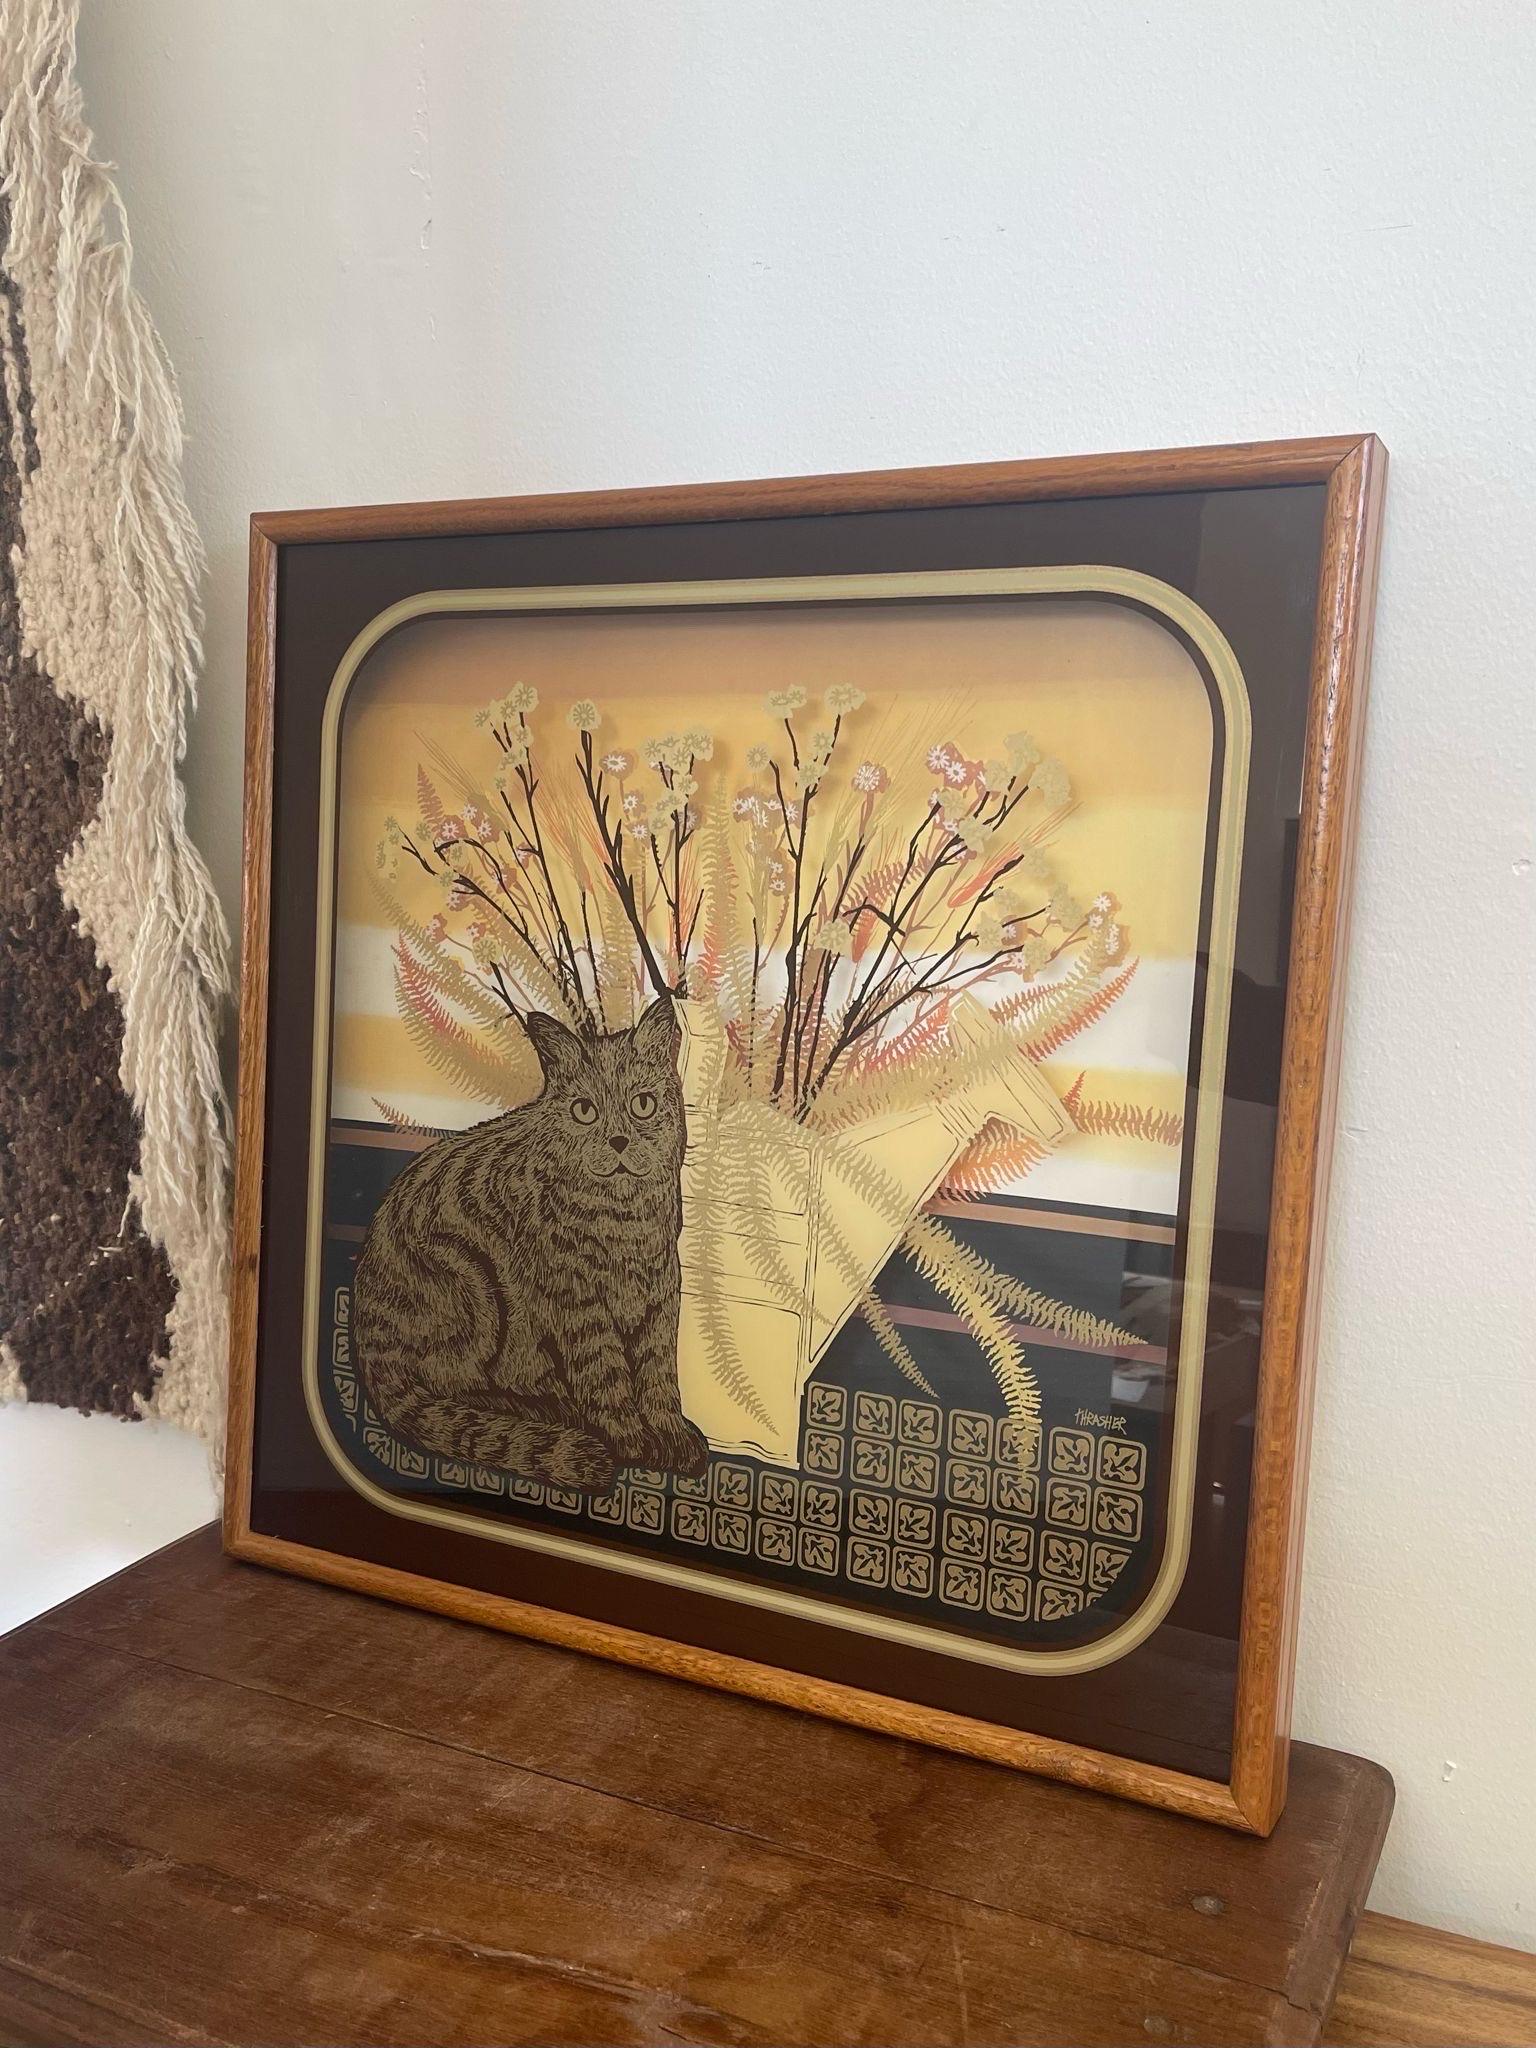 Made by California Artist Virgil Thrasher in the 1970s.Brown mustard, and gold tones reflective of the period.A combination of reverse painting on glass, coordinated with a recessed scenic background gives a Contemporary Mid Century Style. Vintage